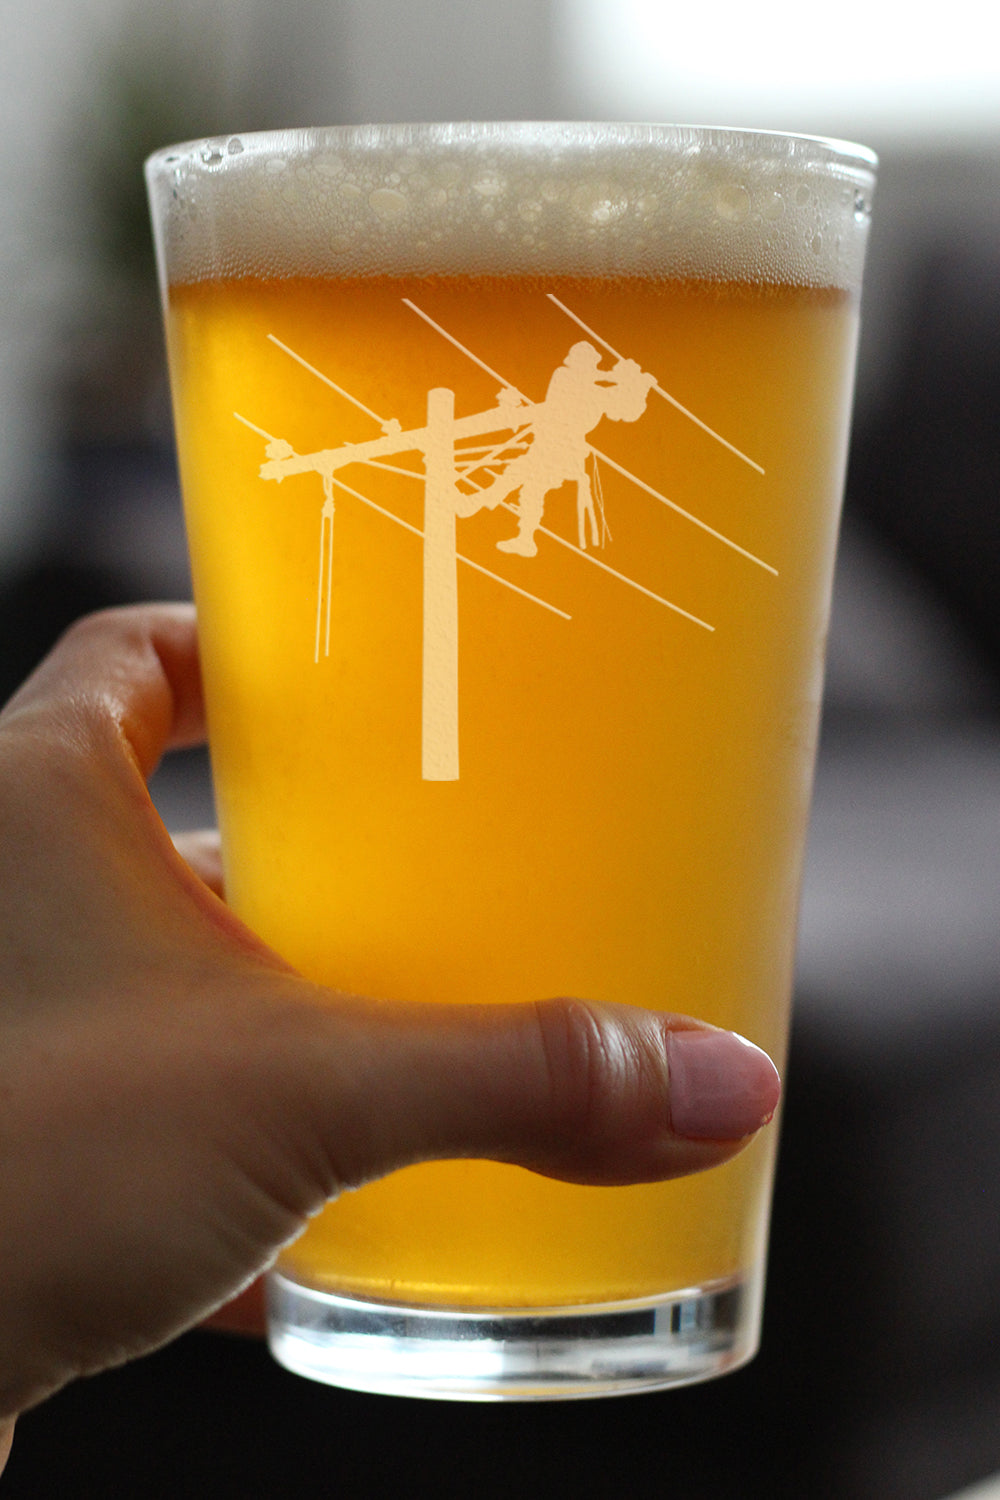 Lineworker Engraved Pint Glass for Beer, Unique Electrical Themed Gifts for Men and Women who are Lineworkers - 16 oz